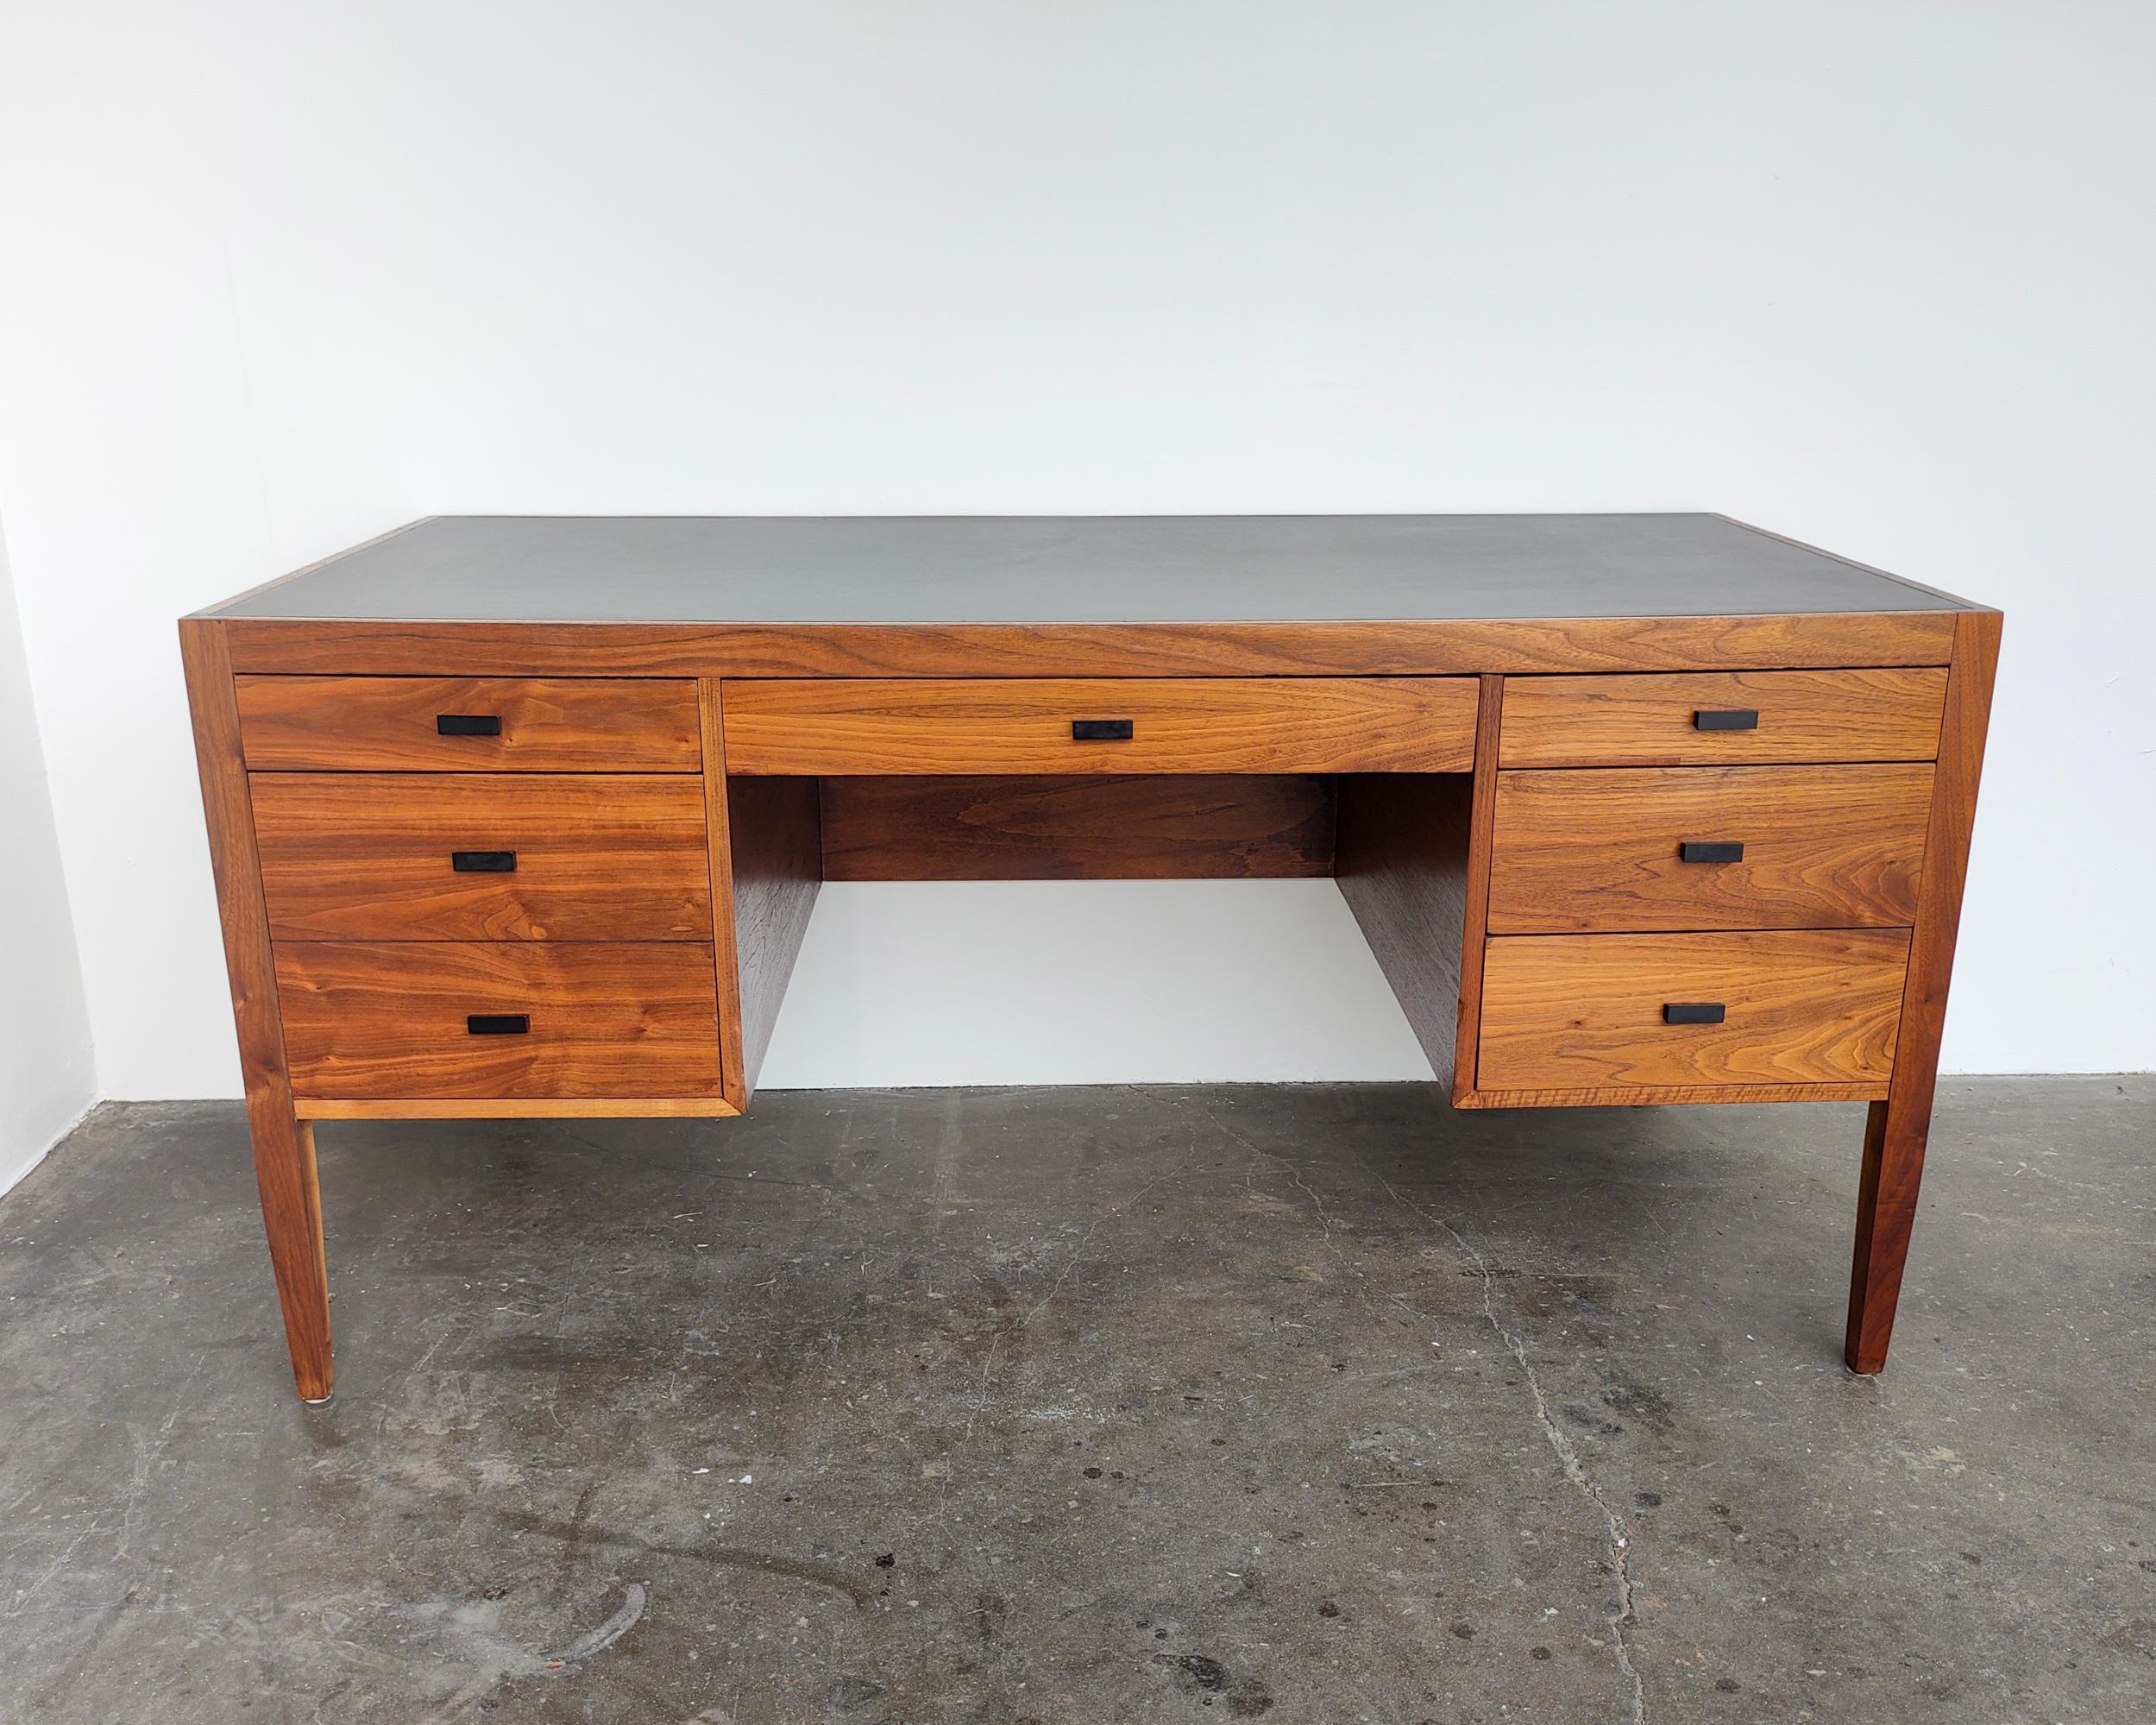 • Mid-20th century
• Refinished walnut wood with original black laminate top
• Six drawers, including one filing drawer
• 60